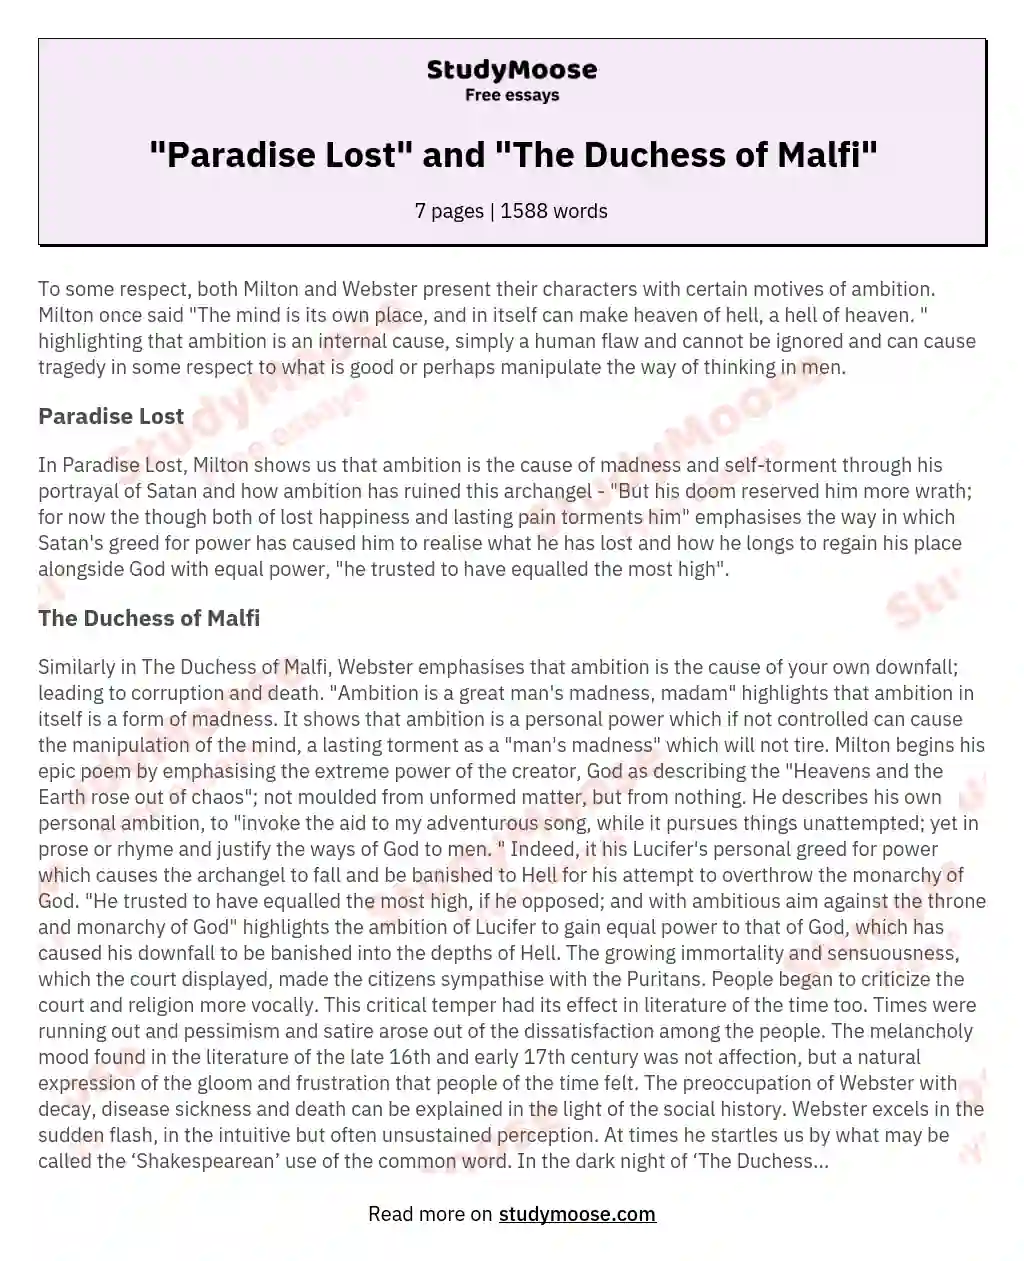 "Paradise Lost" and "The Duchess of Malfi"